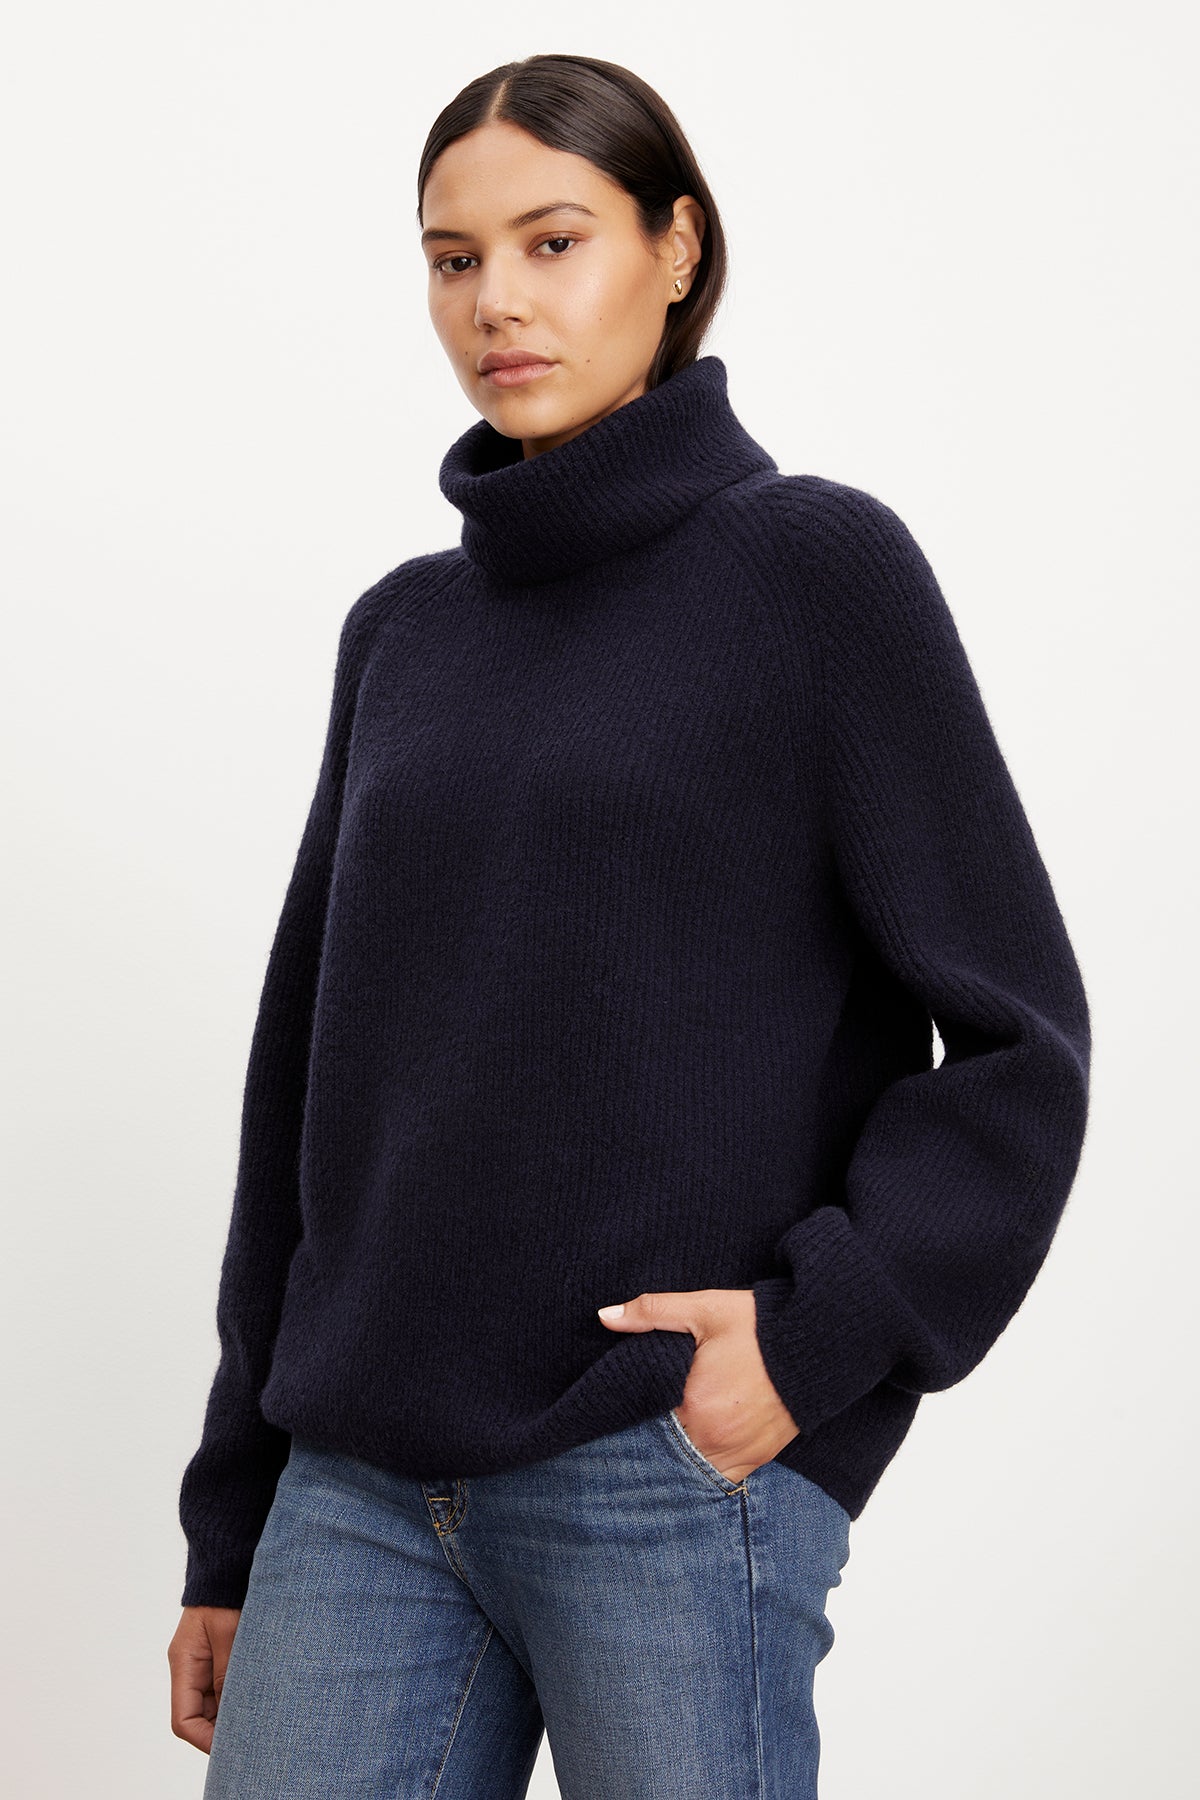   A model wearing a cozy Velvet by Graham & Spencer JUDITH turtleneck sweater and jeans. 